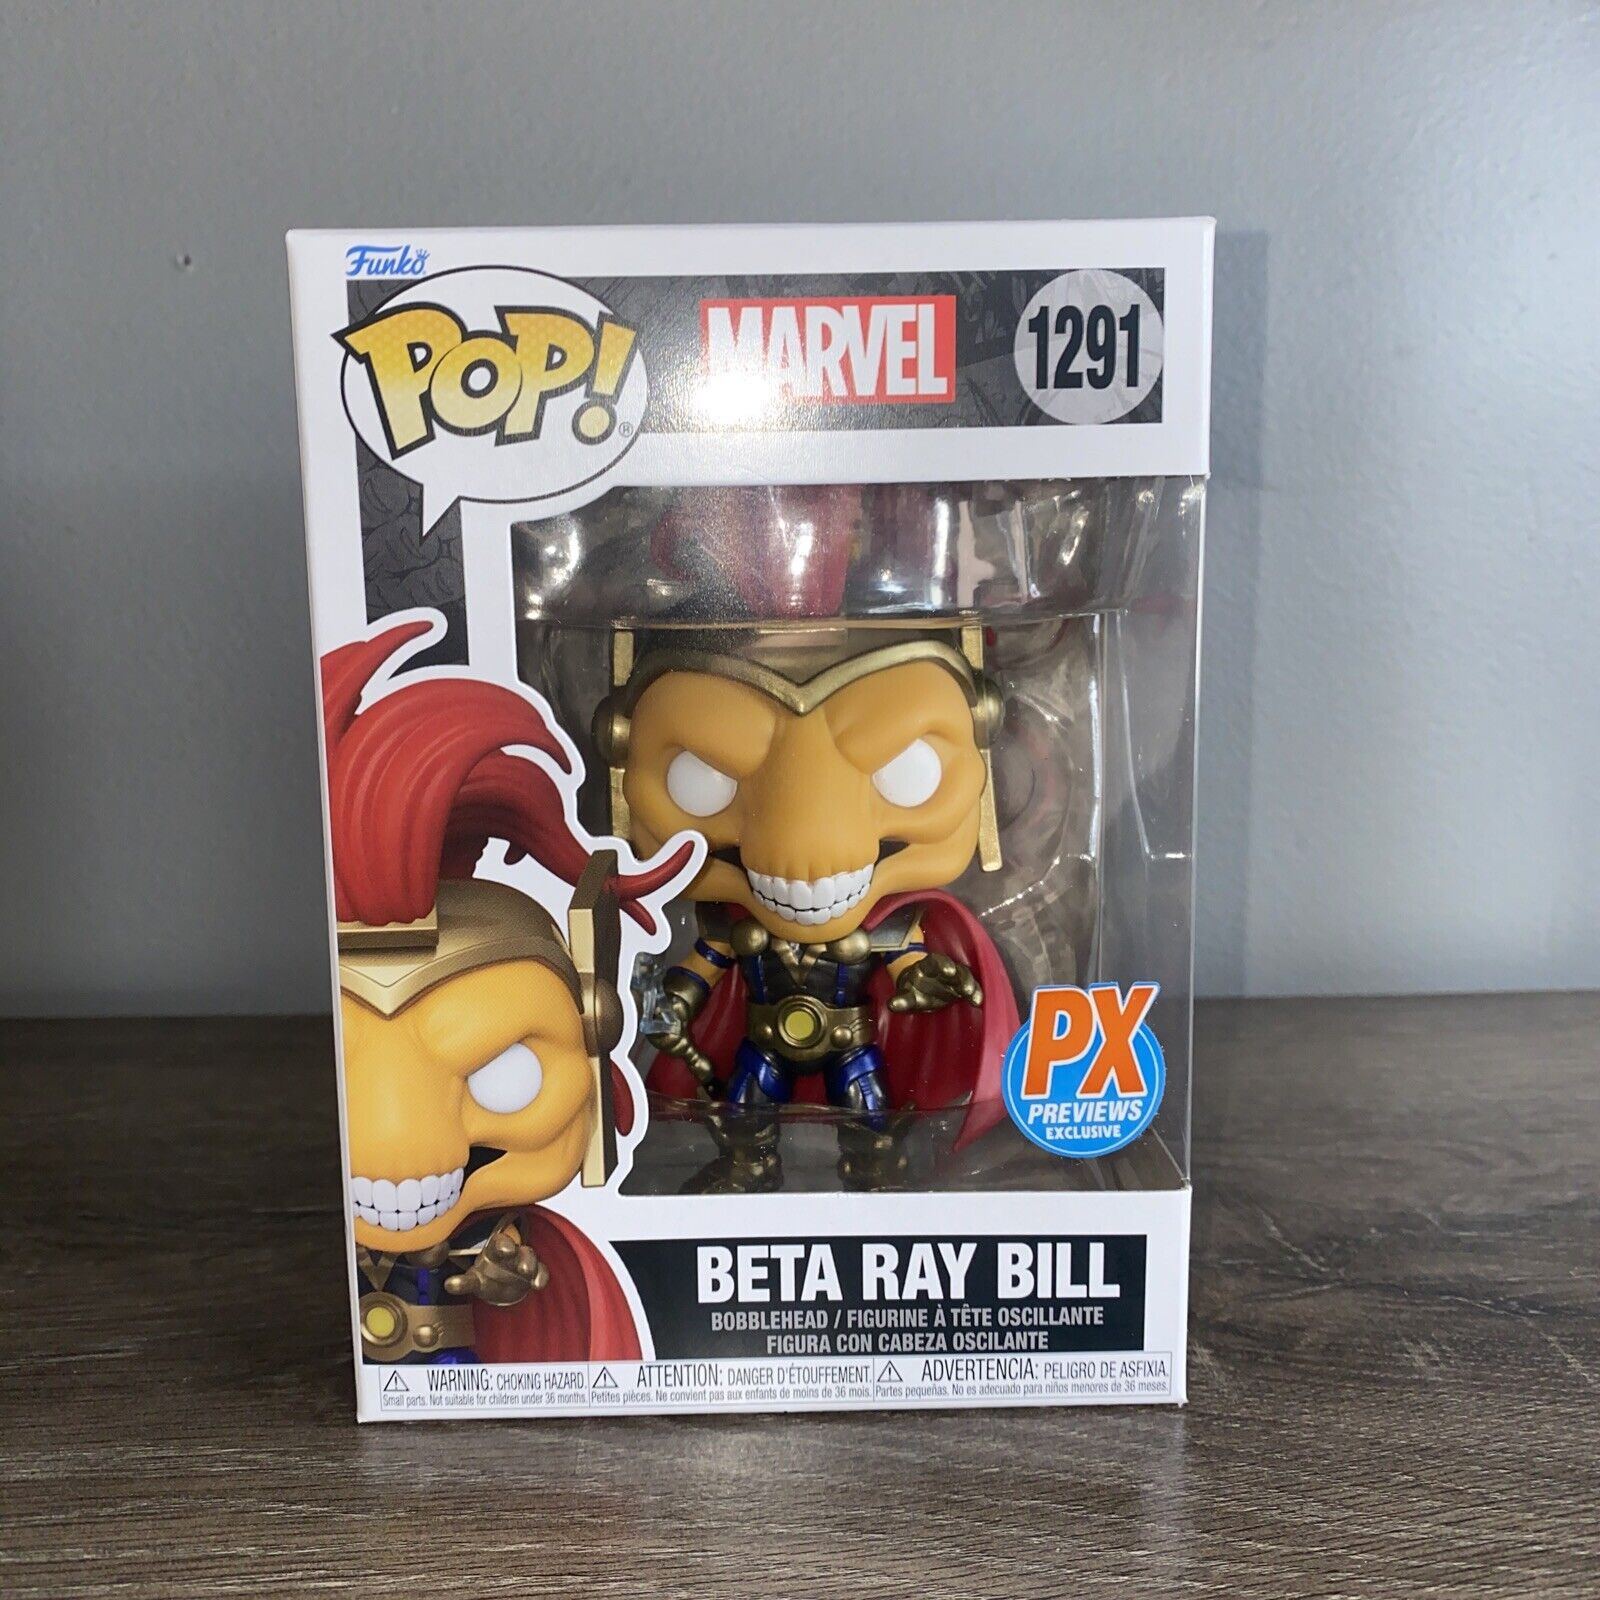 Funko Pop Marvel Thor Beta Ray Bill Figure PX Previews Exclusive - Mint #1291